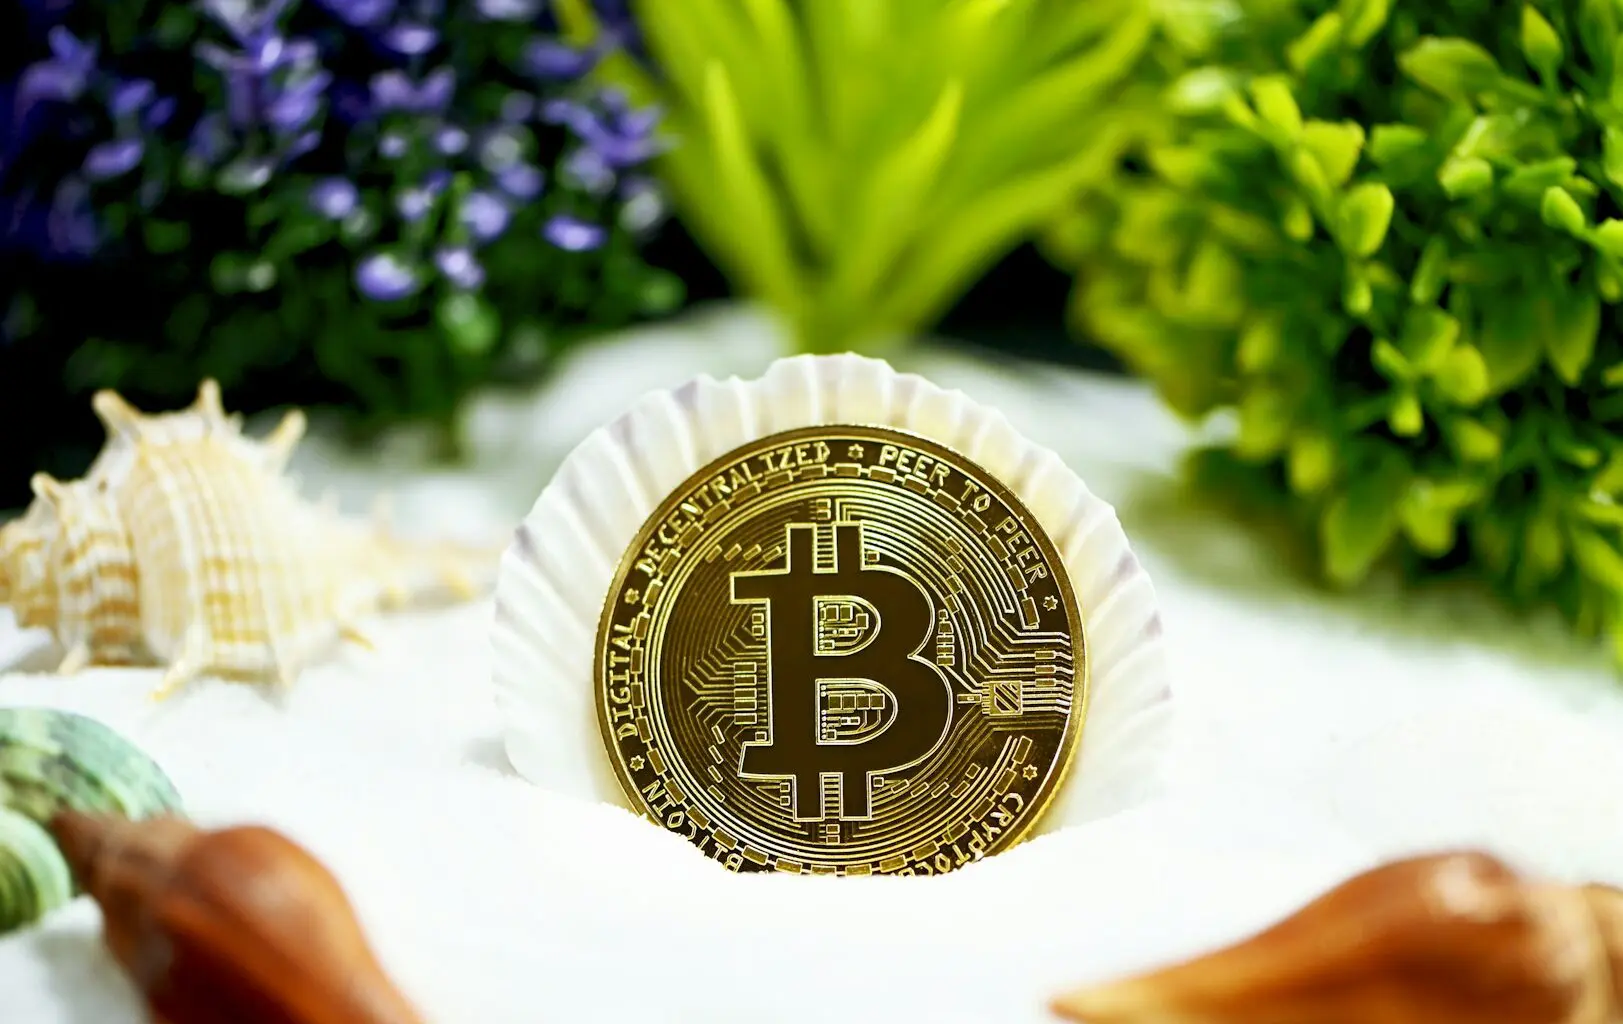 An image of a bitcoin in front of nature elements.